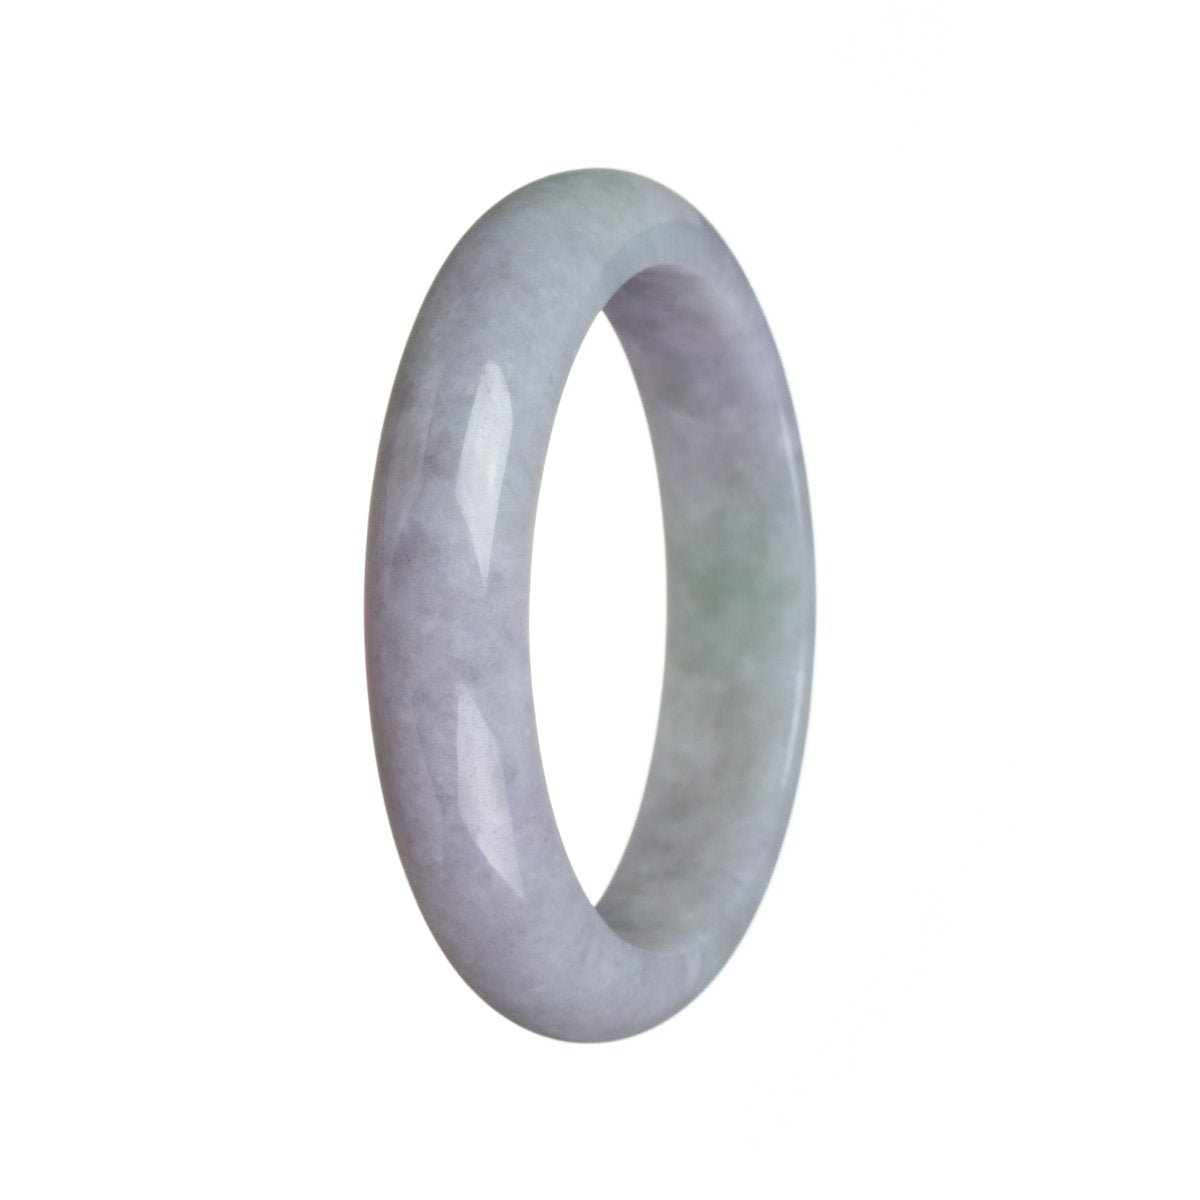 A lavender and green Burma Jade bracelet in a half moon shape, made with authentic untreated stones.